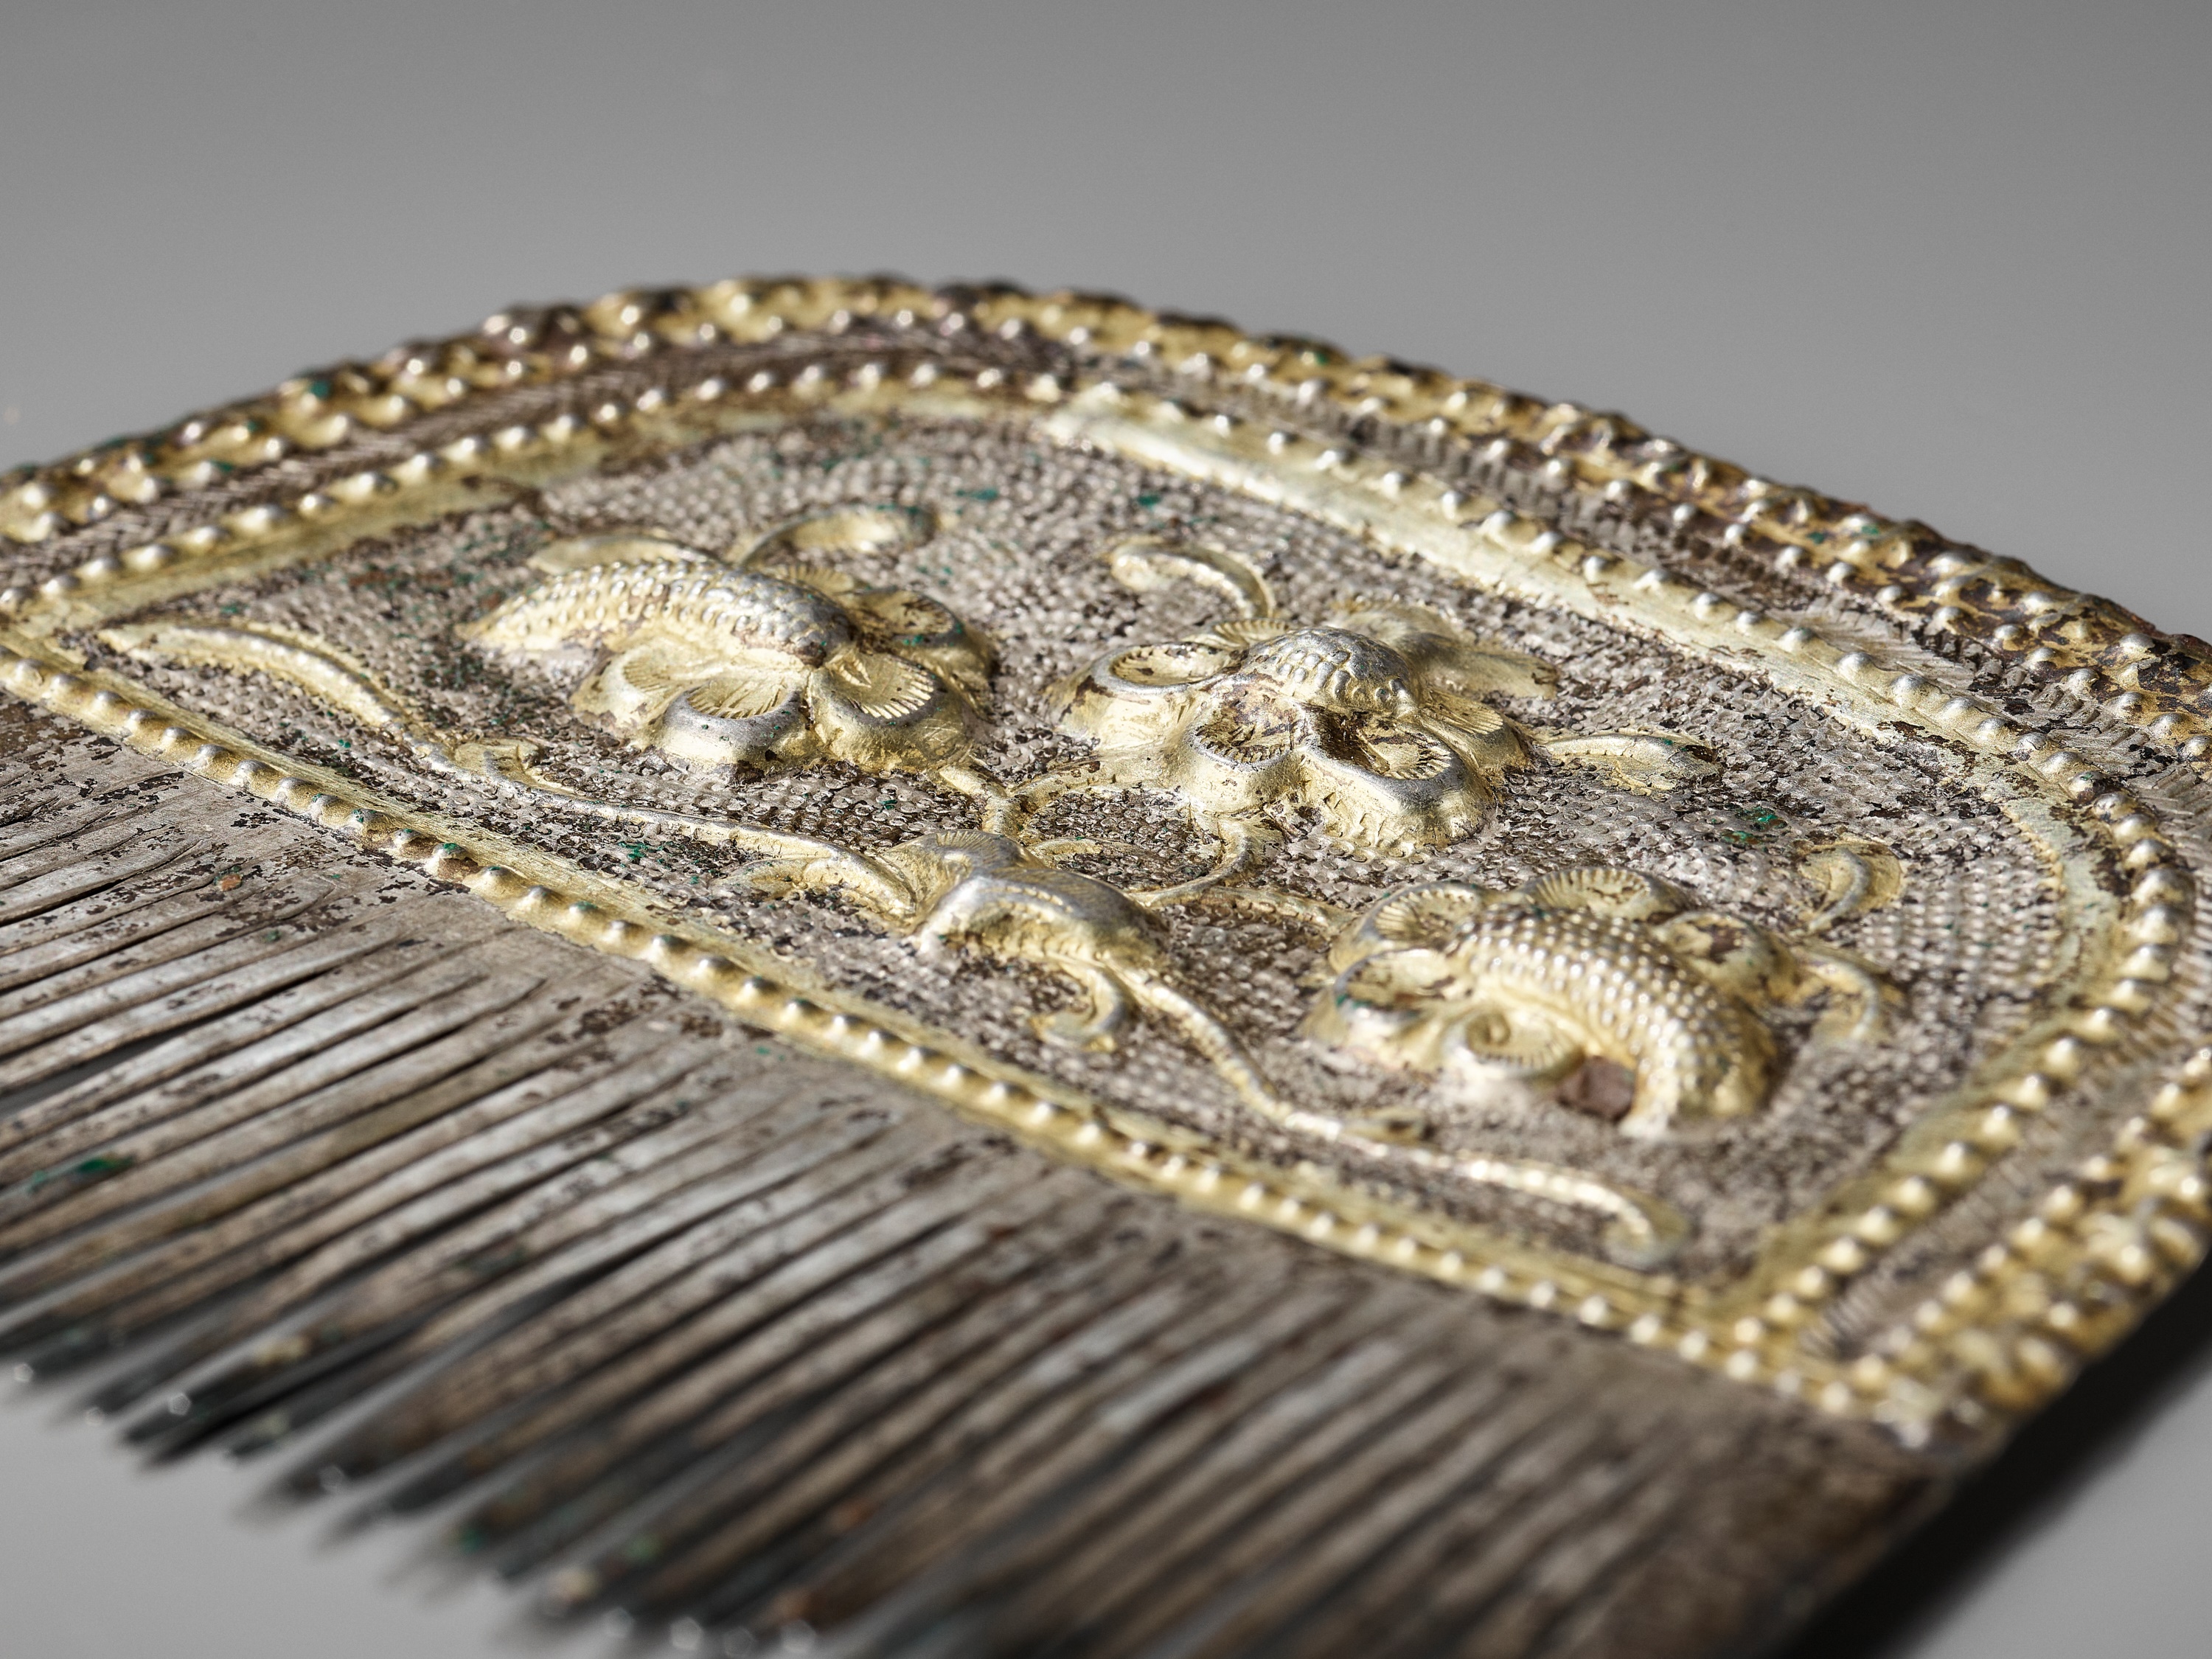 A PARCEL-GILT SILVER COMB, TANG DYNASTY - Image 3 of 12